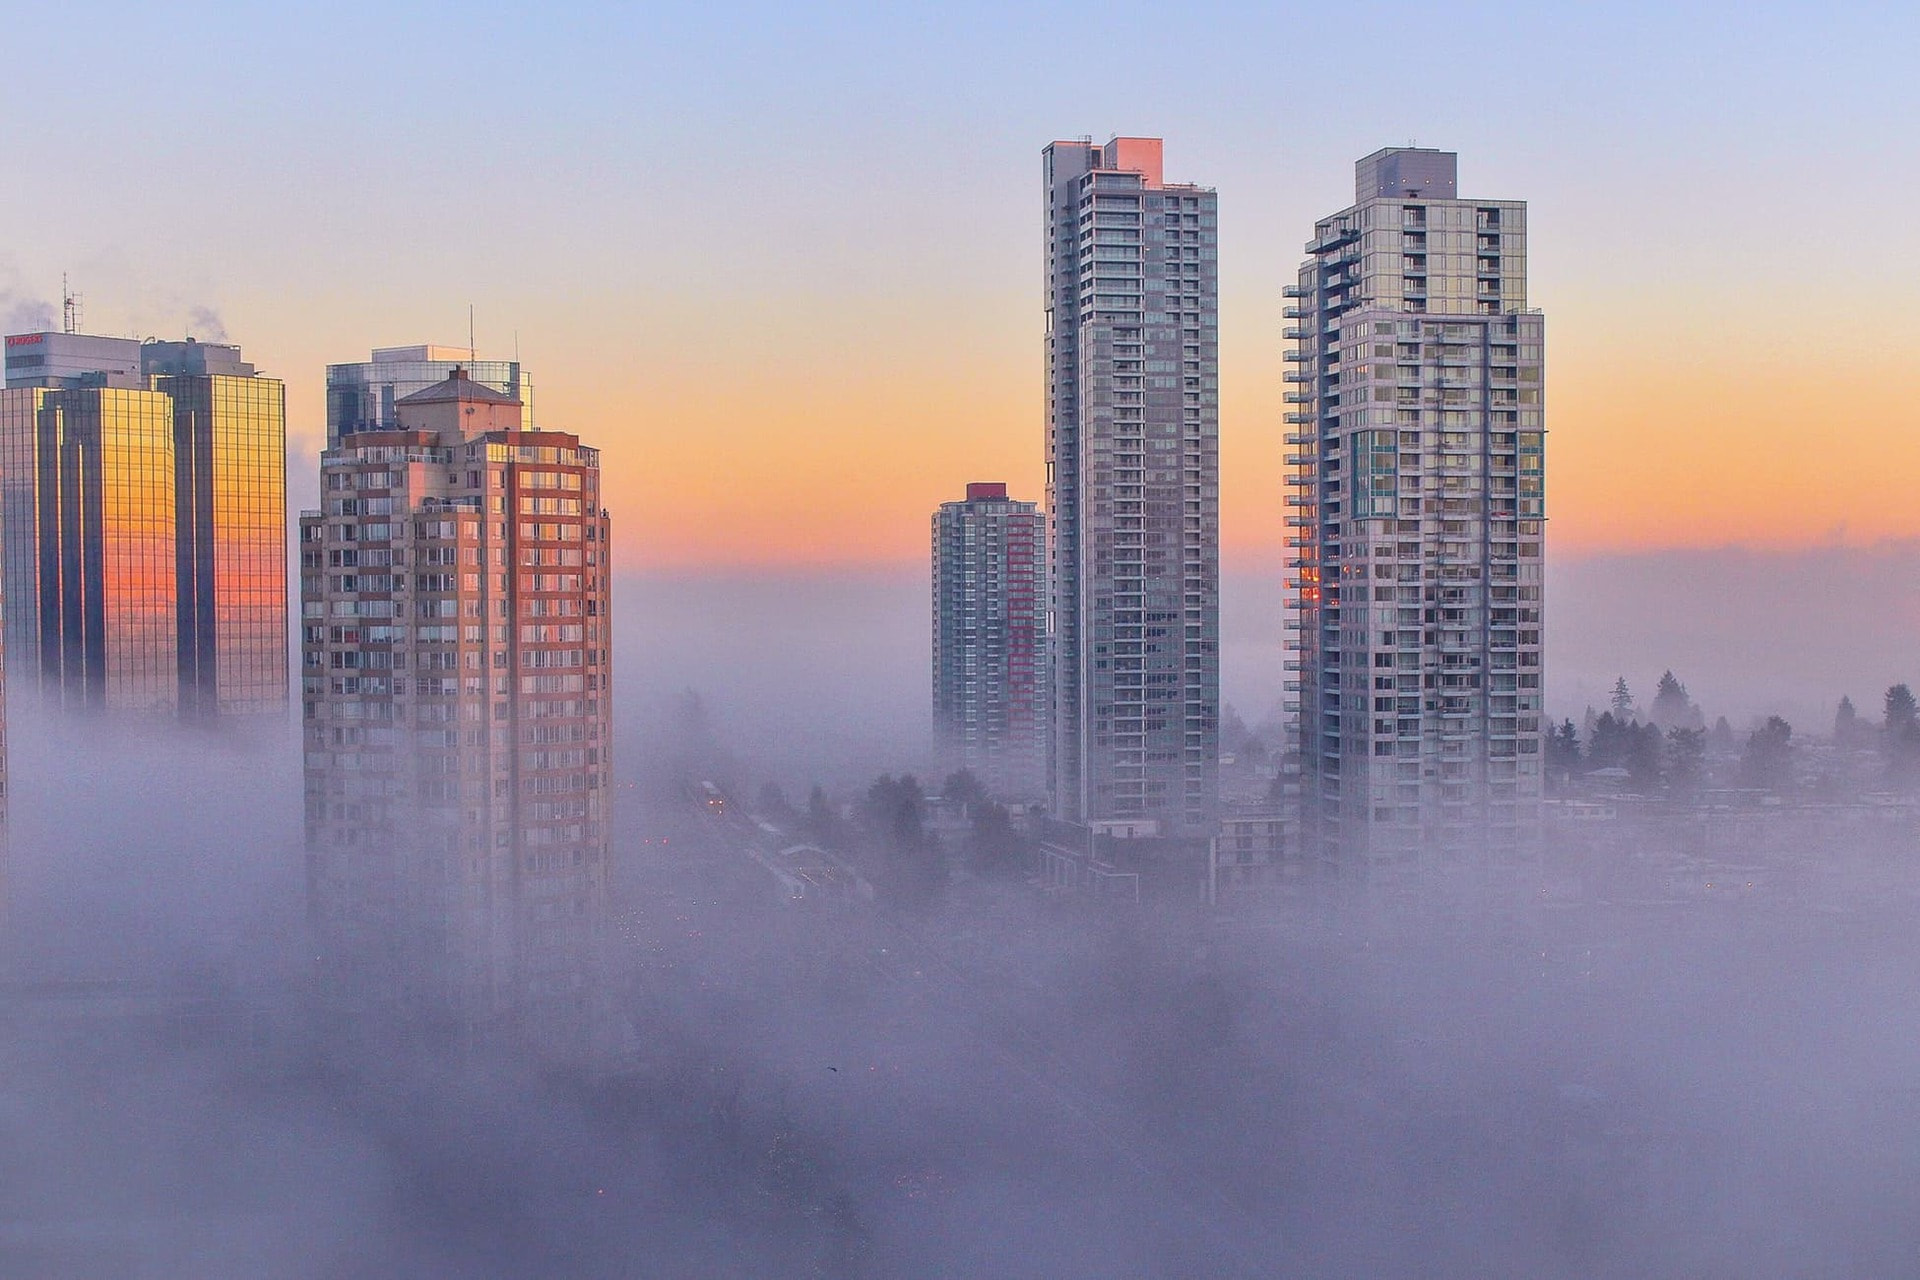 Foggy sky and skyscrapers reaching through the fog in a Canadian city.